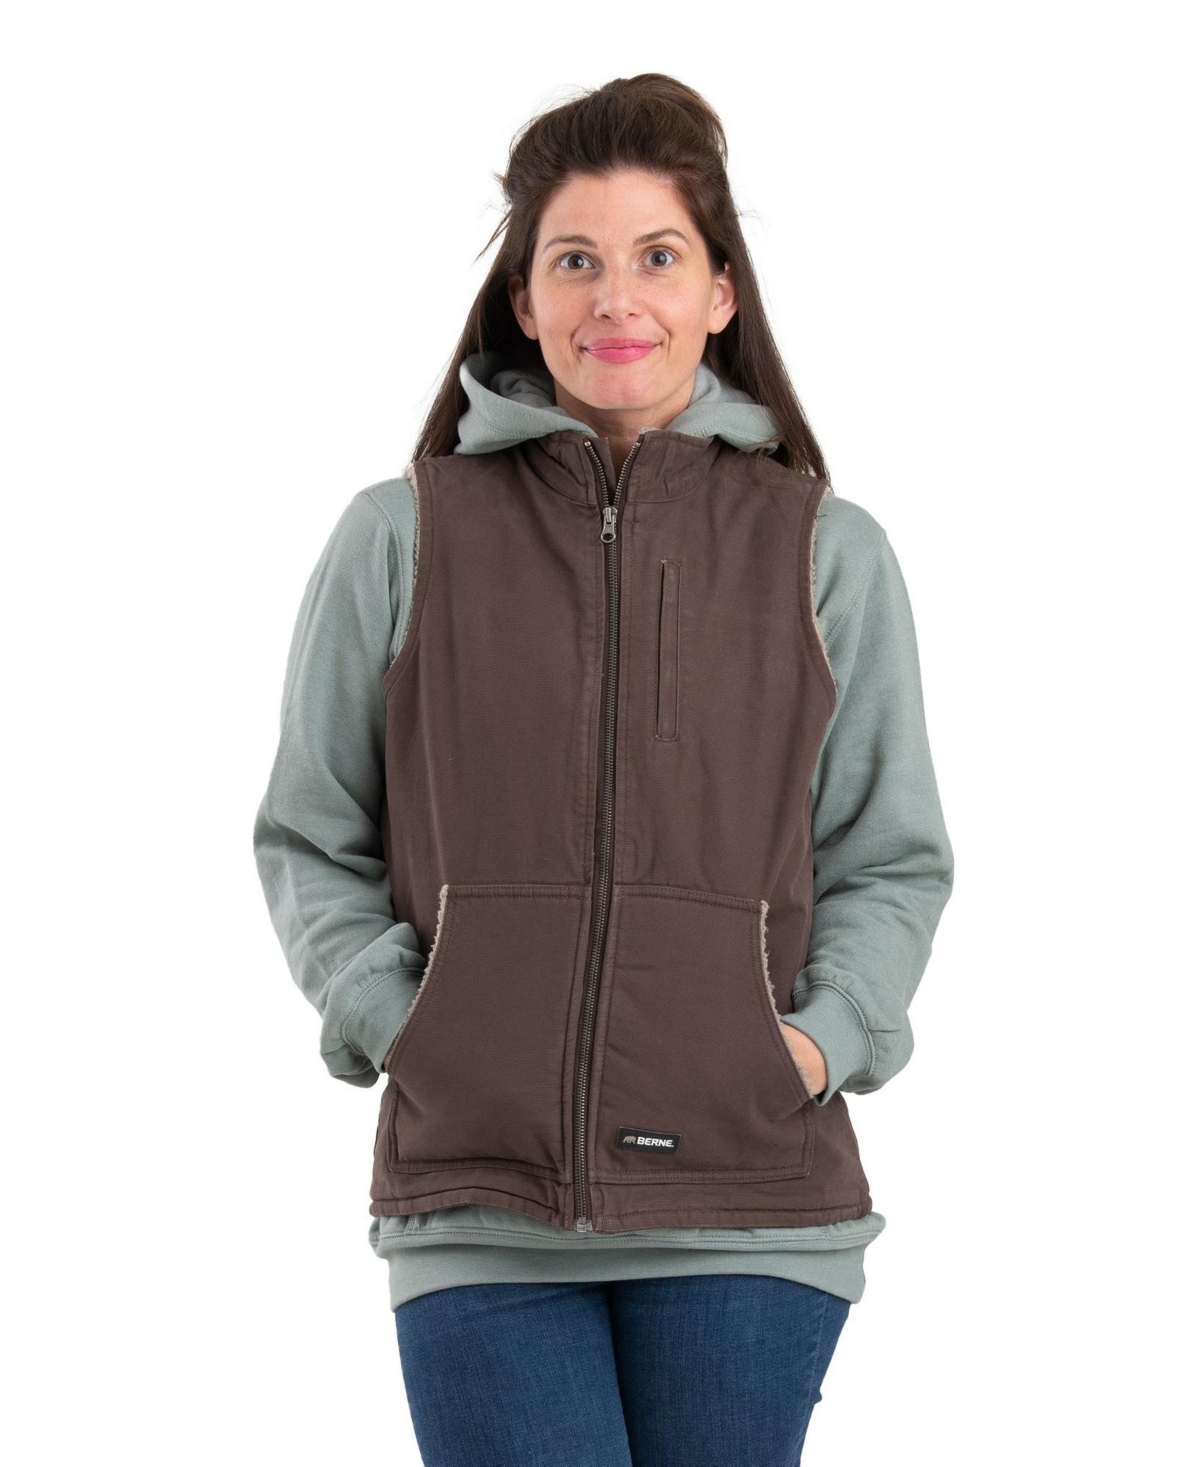 Plus Size Lined Softstone Duck Vest - Tuscan